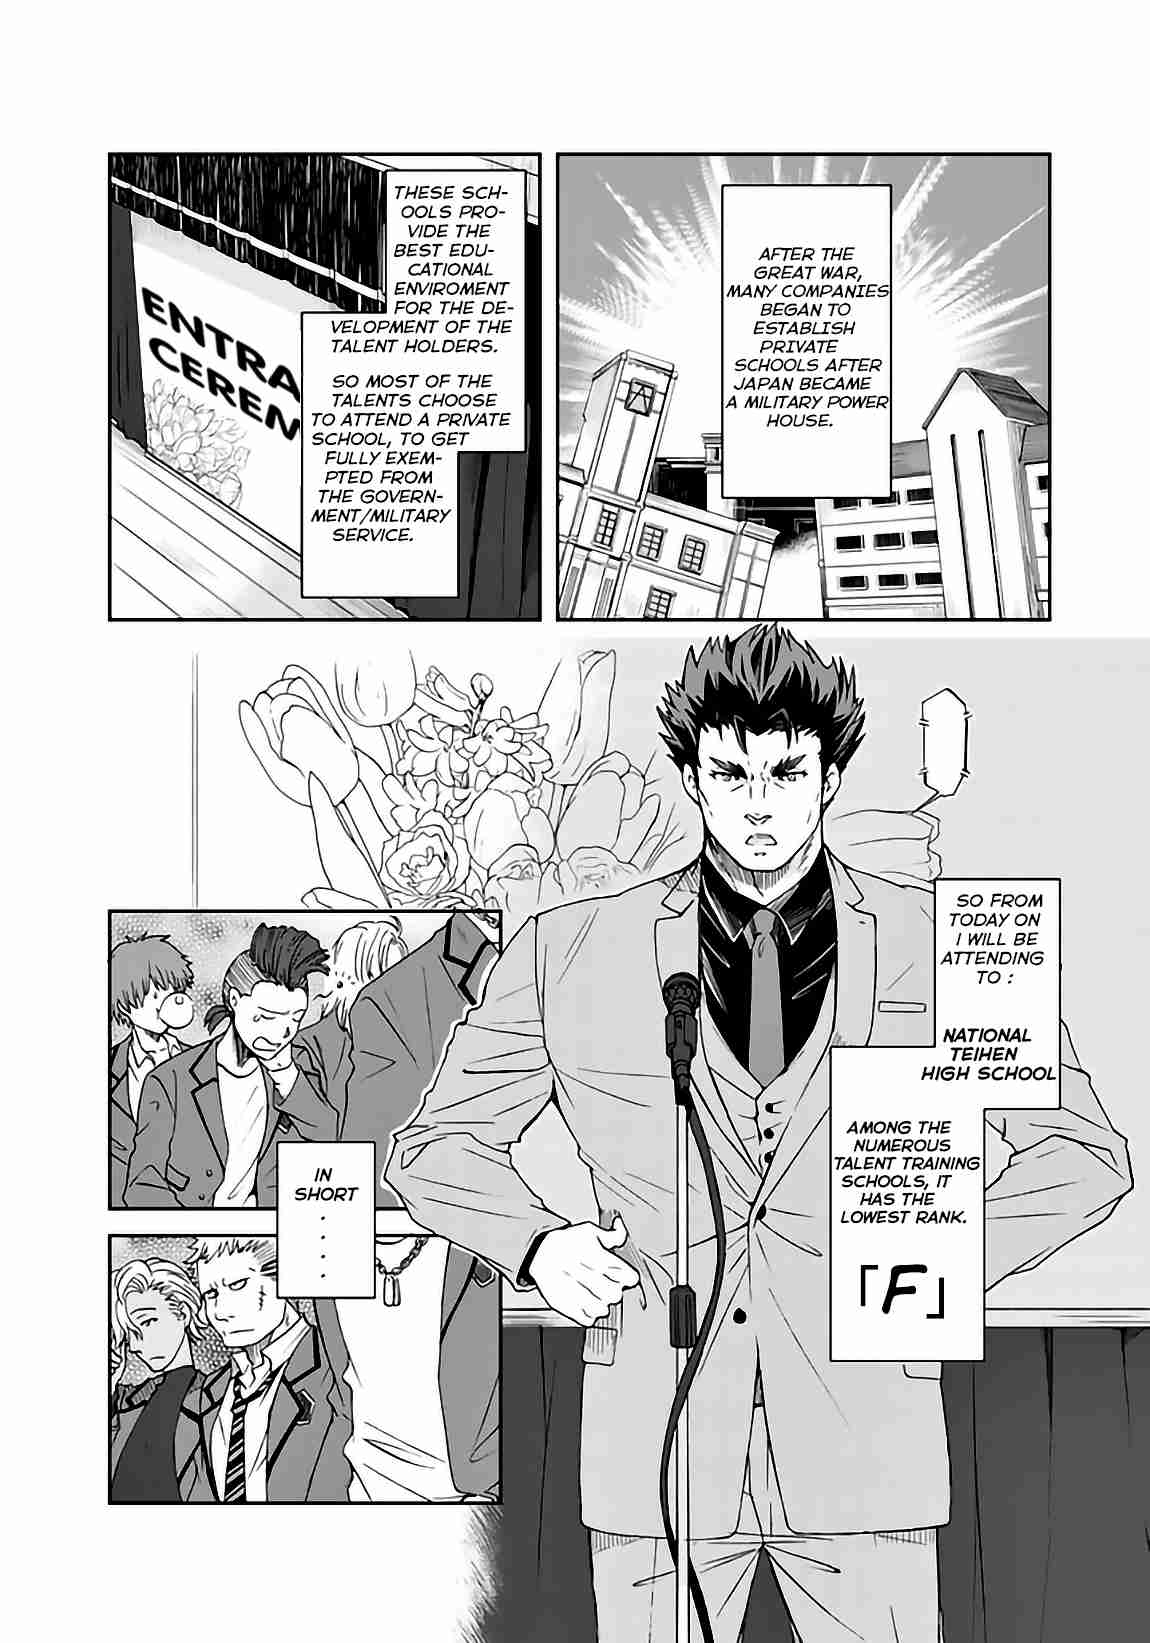 I, Who Acquired a Trash Skill 【Thermal Operator】, Became Unrivaled. Vol. 1 Ch. 1.5